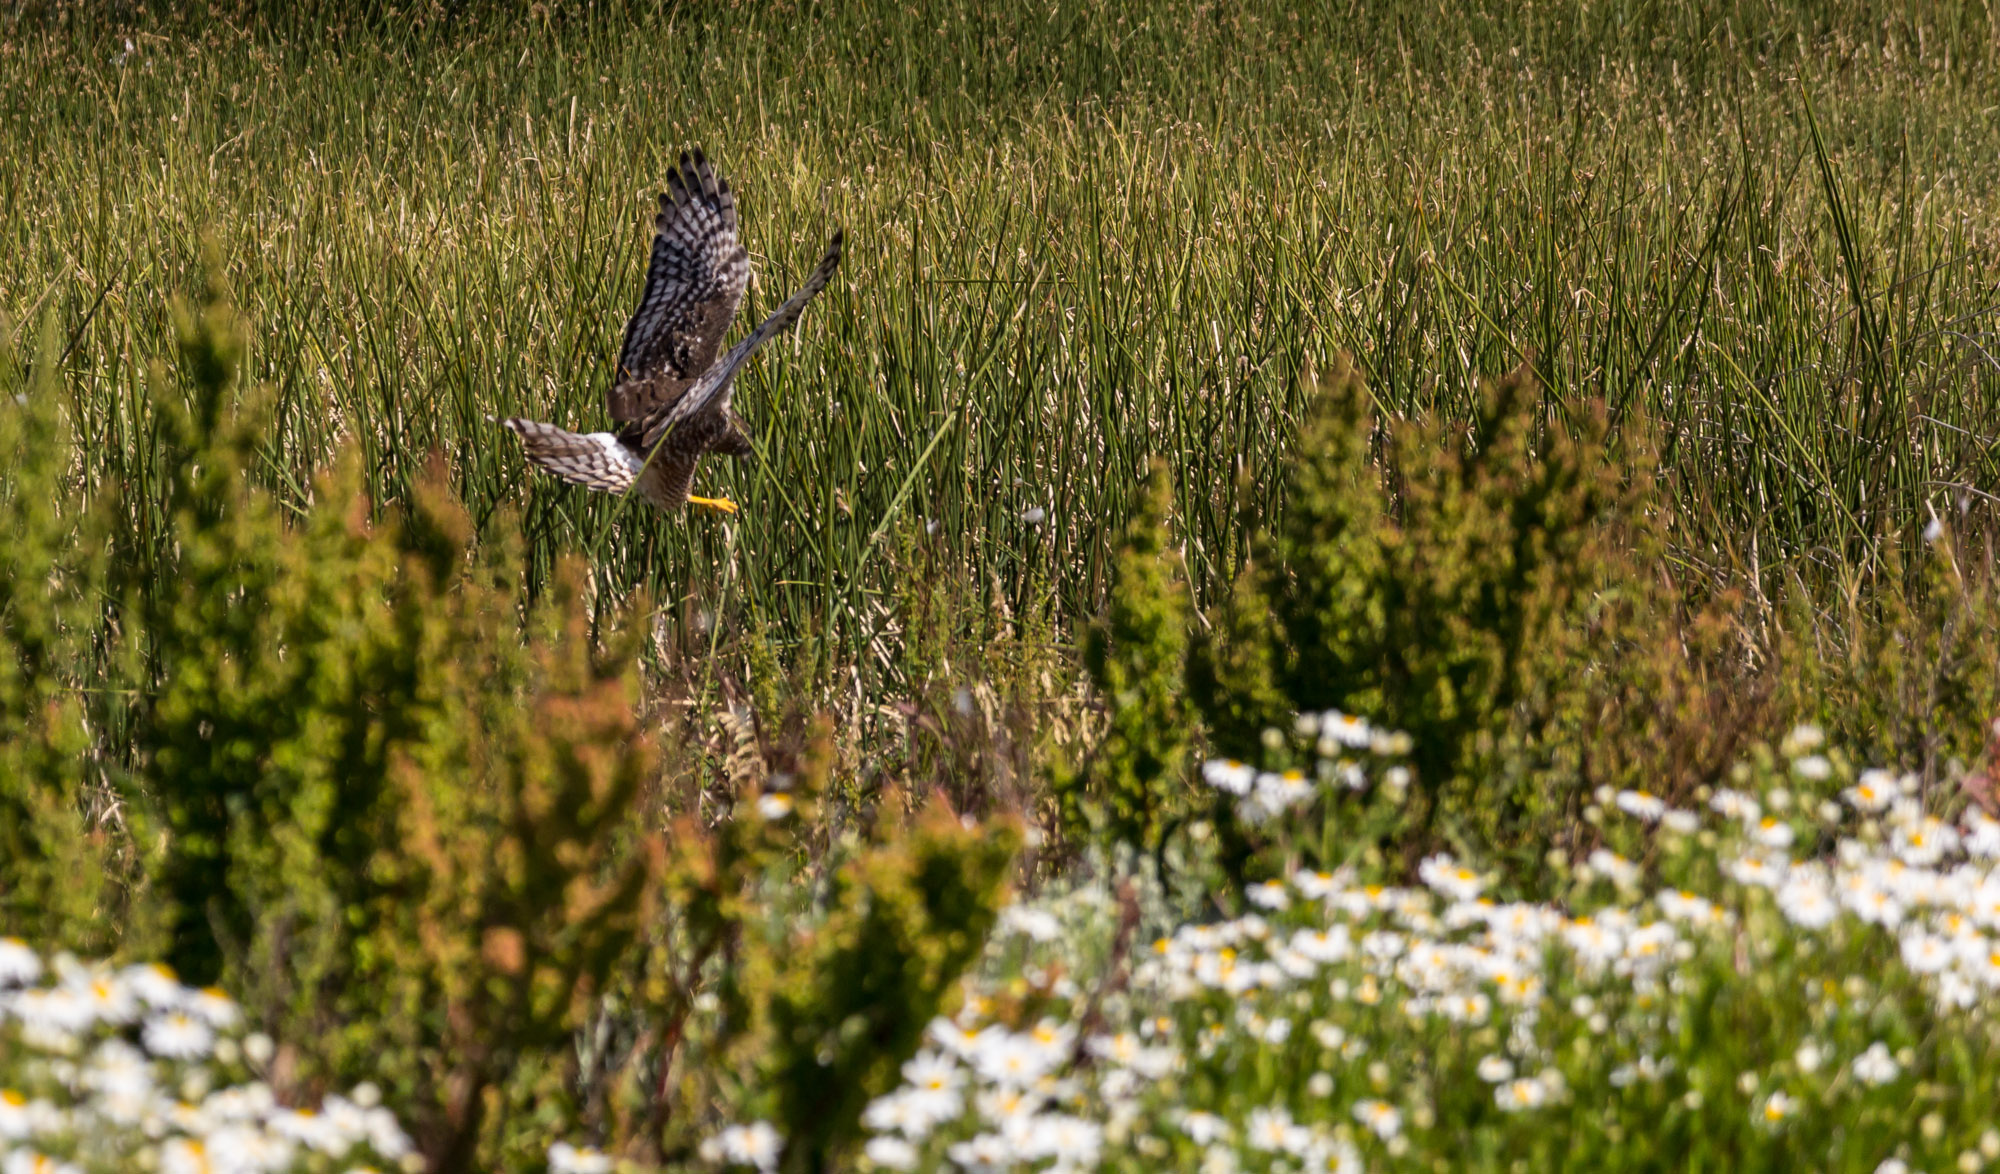 A South American Kestrel dives in for the kill in the wetlands near El Calafate